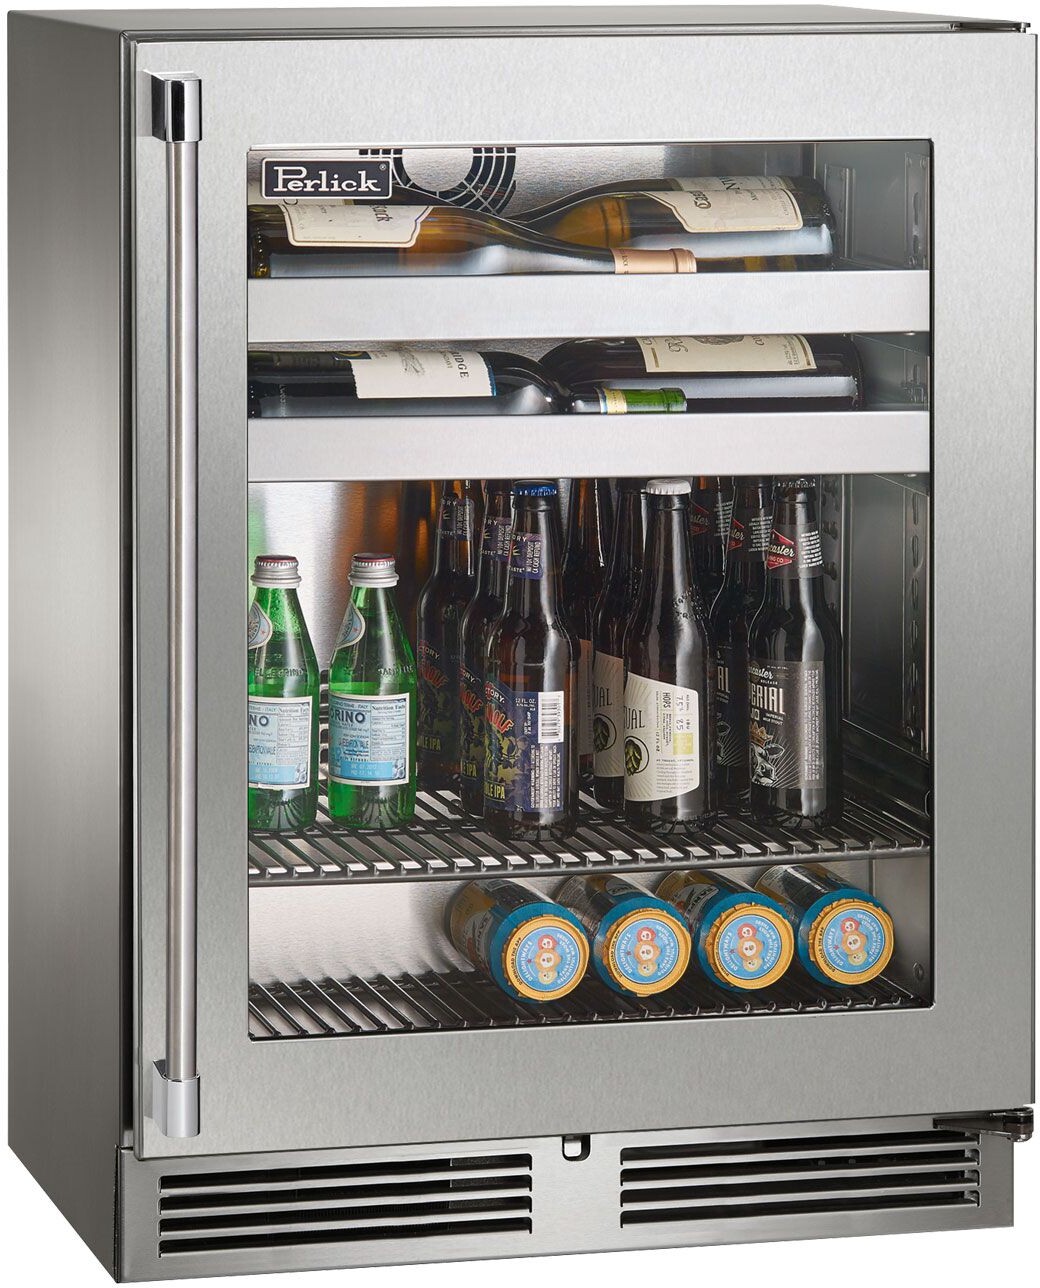 How Deep Is A Beverage Refrigerator? 